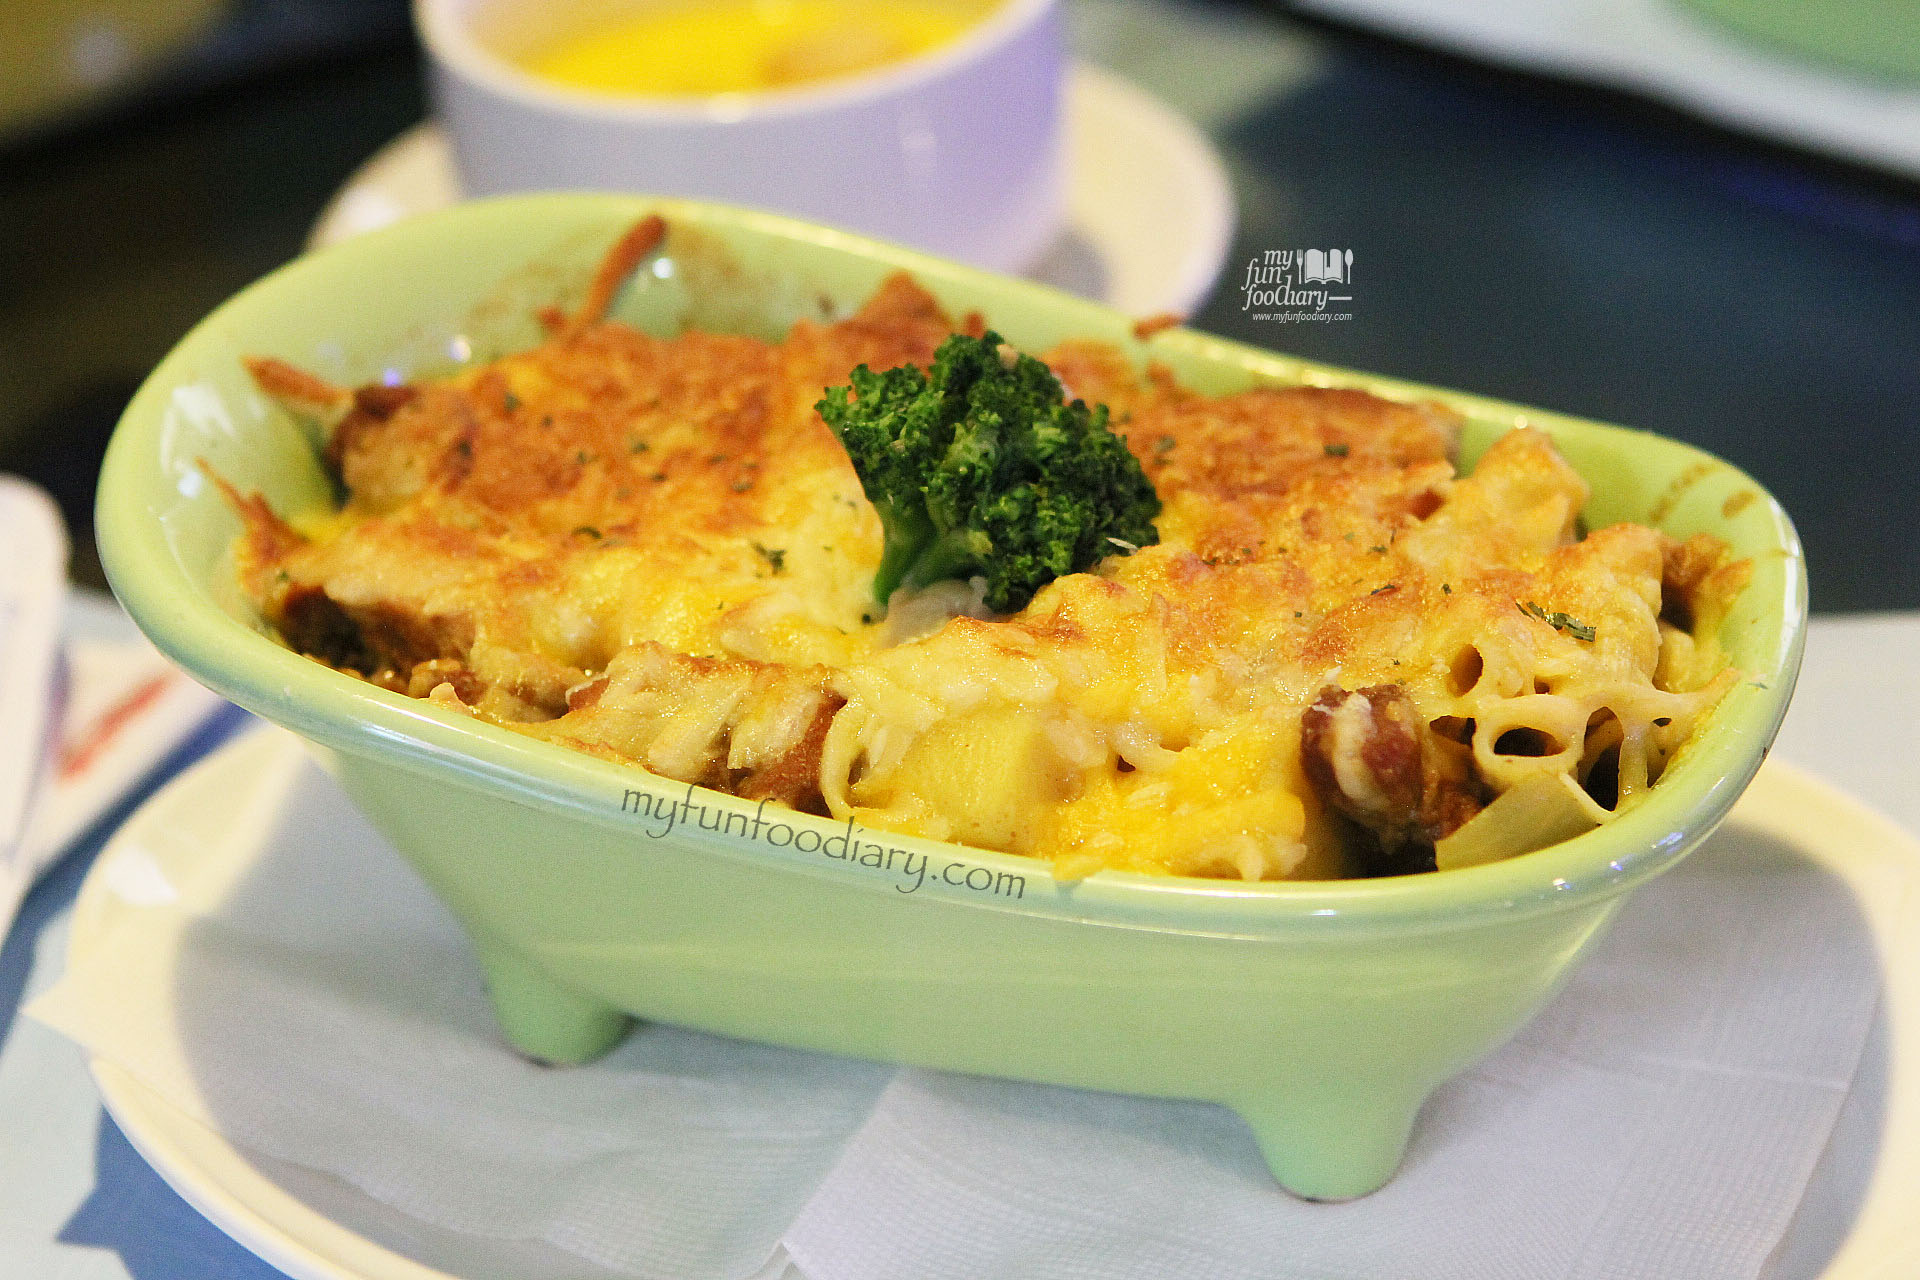 Chicken Curry Au Gratin at Modern Toilet Cafe Taiwan by Myfunfoodiary